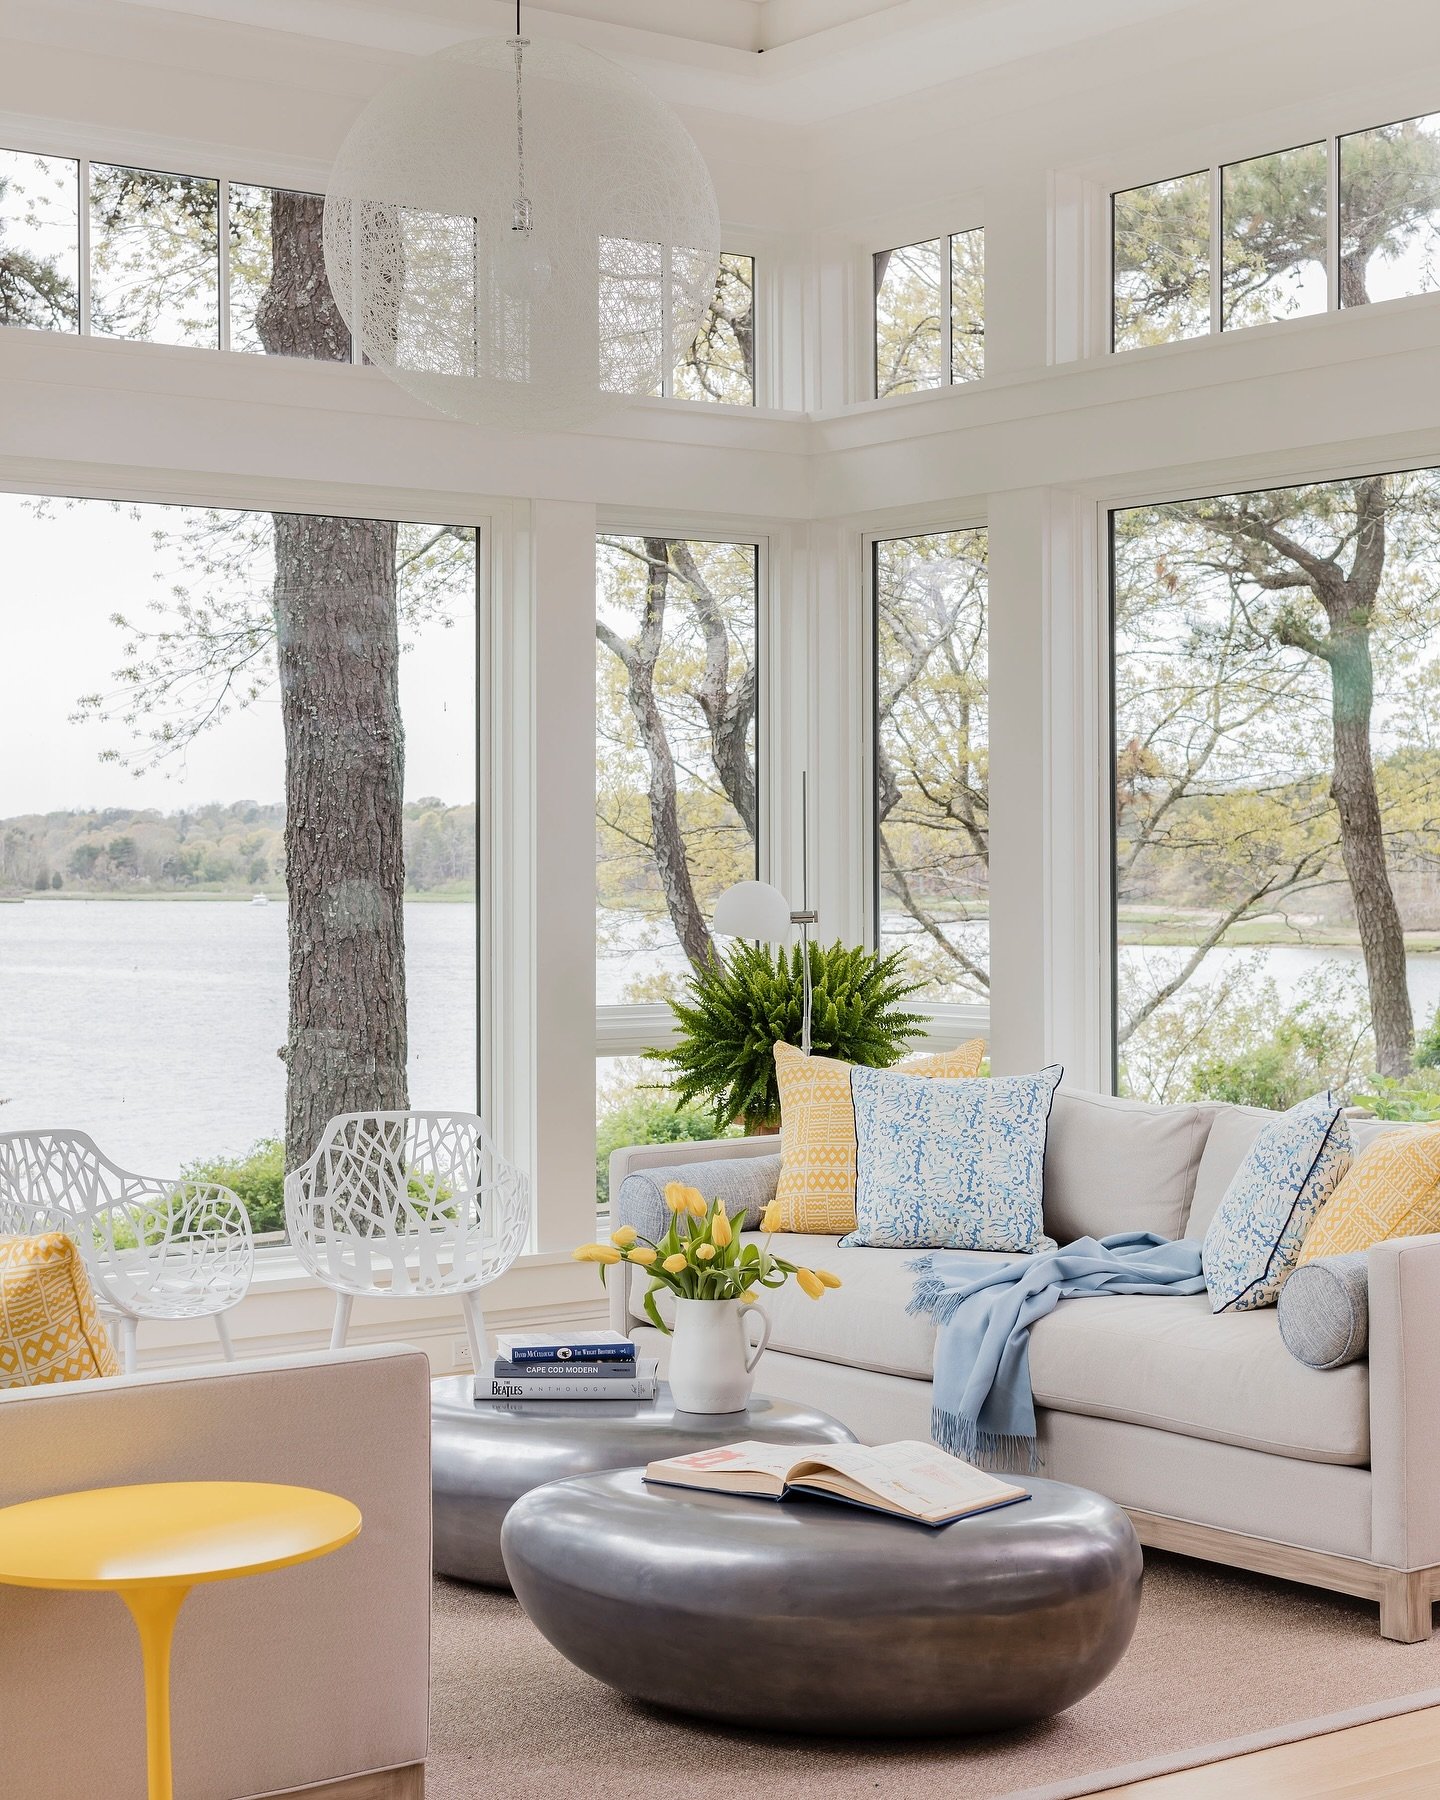 Not wanting to compete with the views, the design details in this waterfront home&rsquo;s sunroom are kept subtle - but certainly not sterile.⁣
⁣
⁣
Interior design: @robingannoninteriors⁣
Photography: @michaeljleephotography